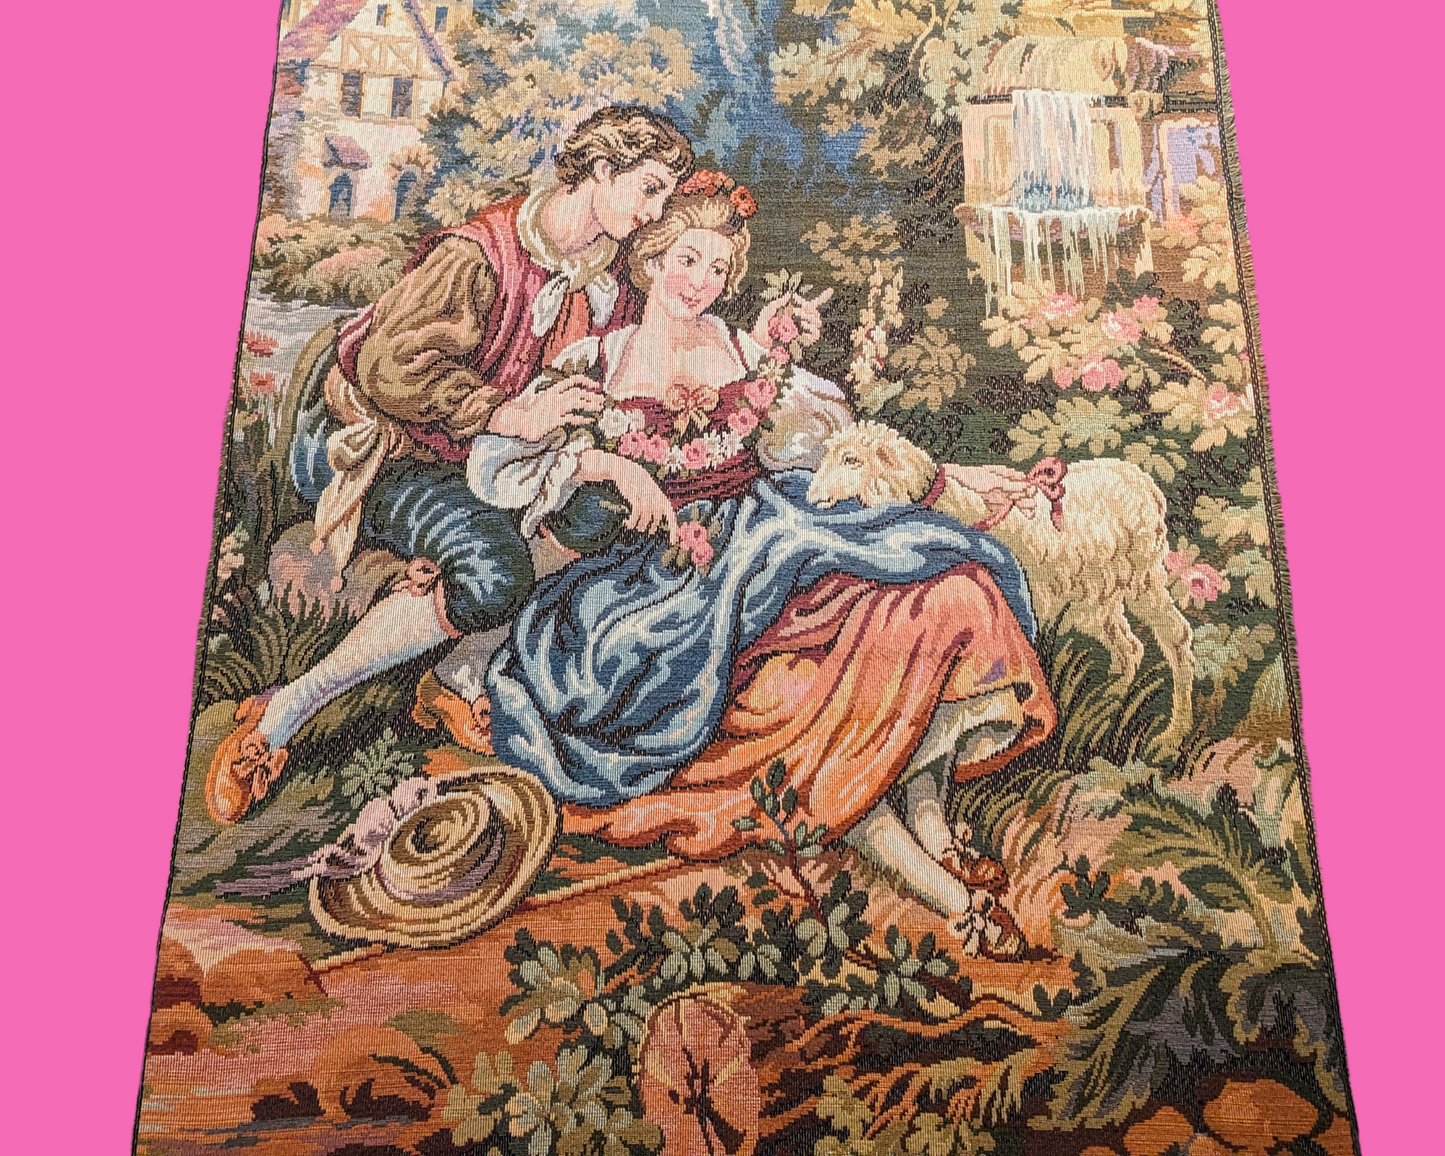 Vintage 1980's Needlepoint Tapestry of Victorian Era Lovers